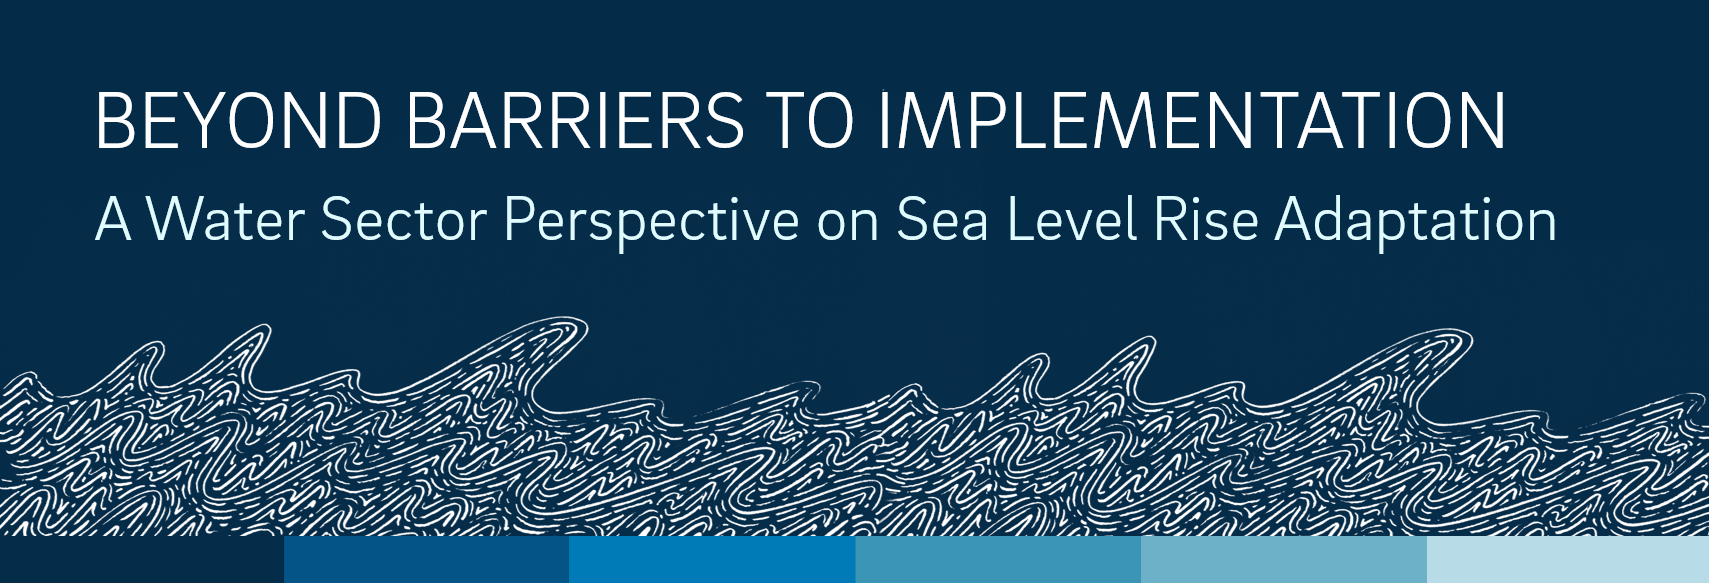 Blue background with white text and splash graphics says "beyond barriers to implementation: A water sector perspective on seal level rise adaptation"